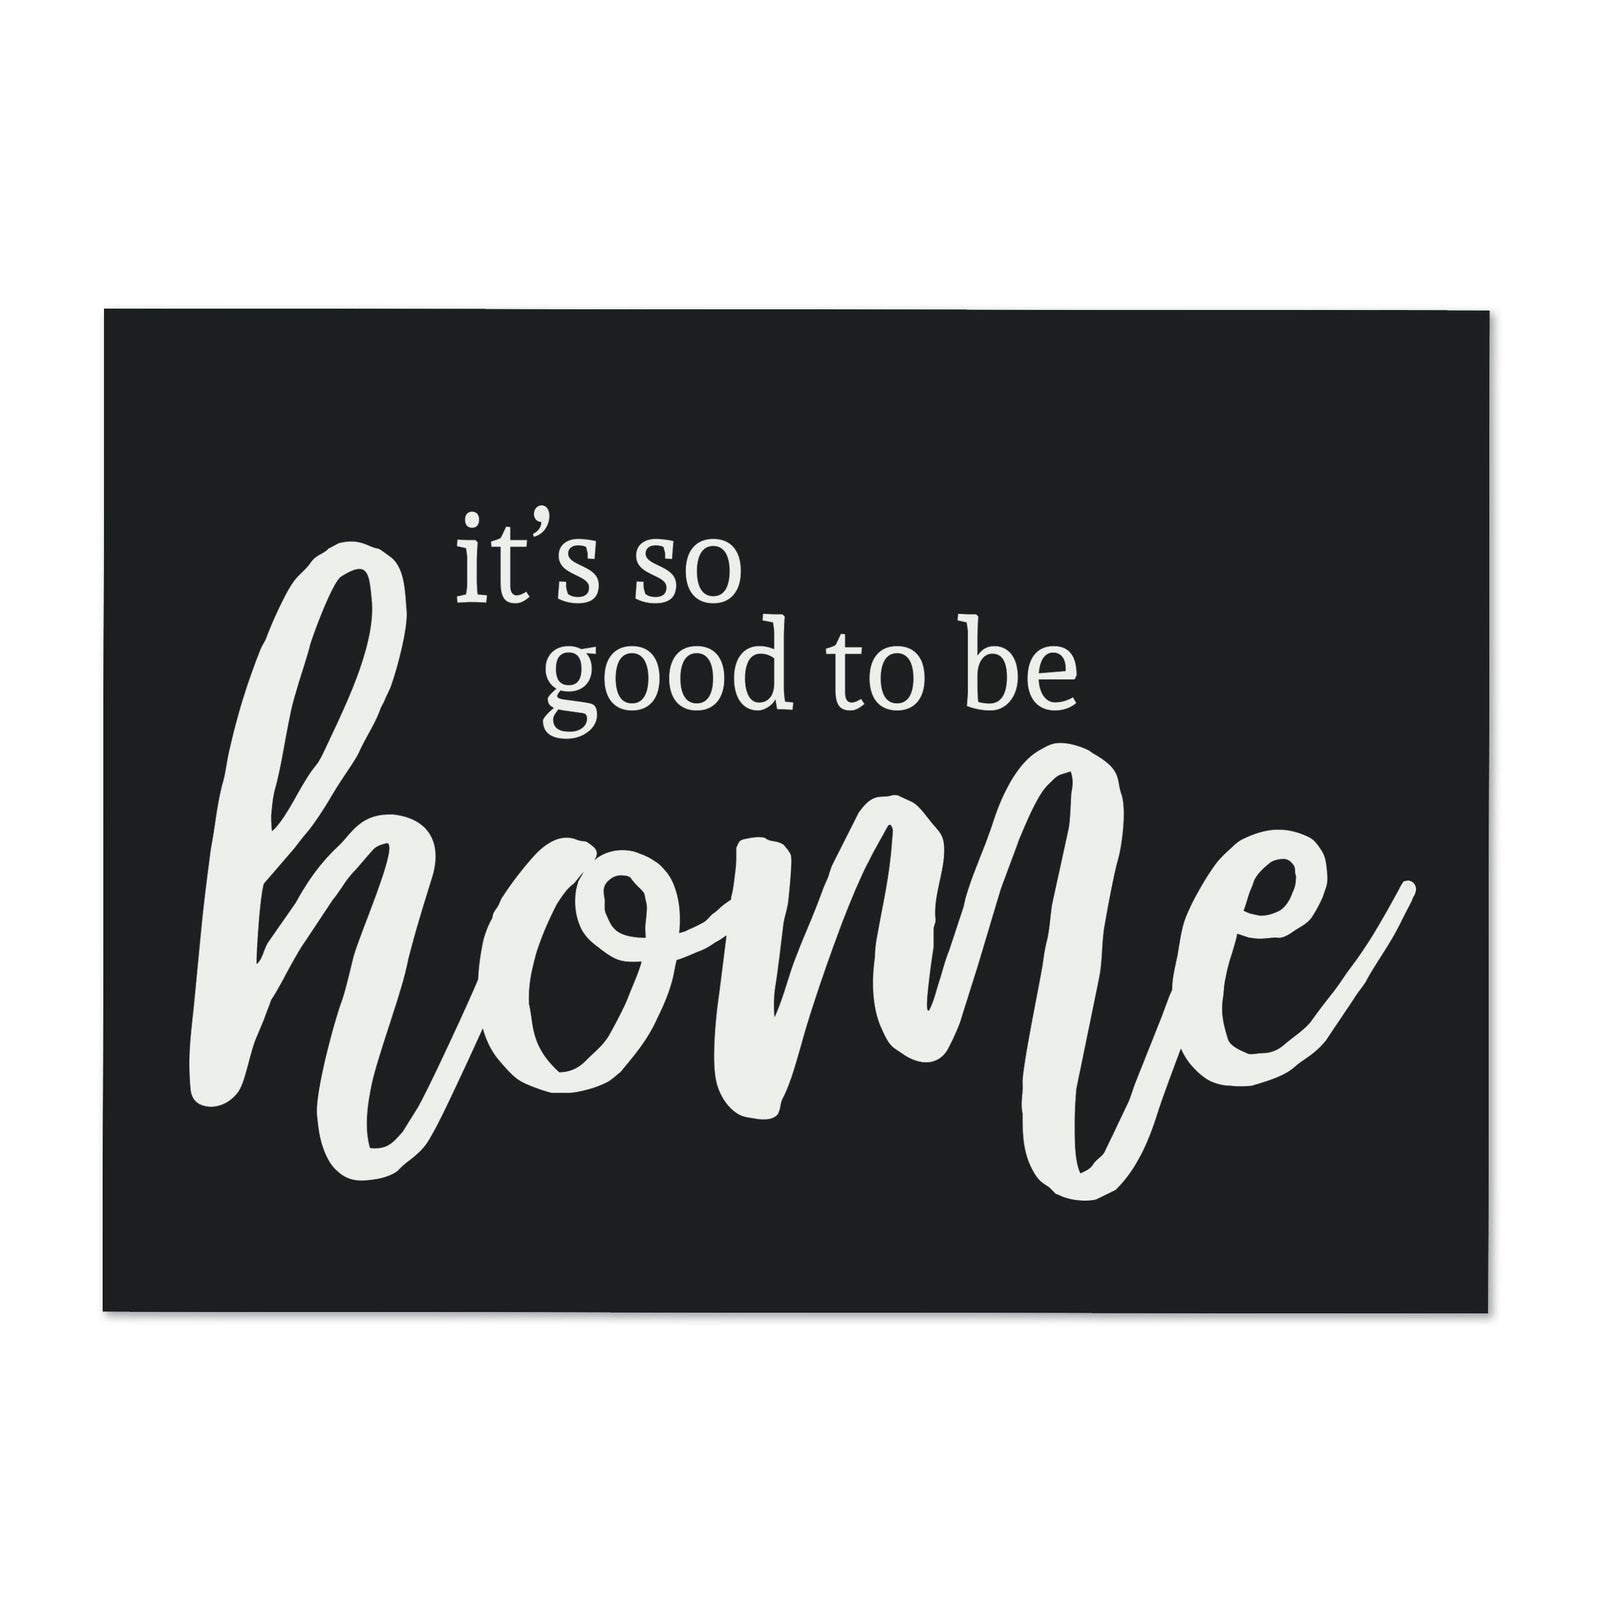 LifeSong Milestones Home Sign Wall Decorations for Living Room - Home Wall Art - Wooden Plaque Sign Gift 6“ x 8” Its So Good Black